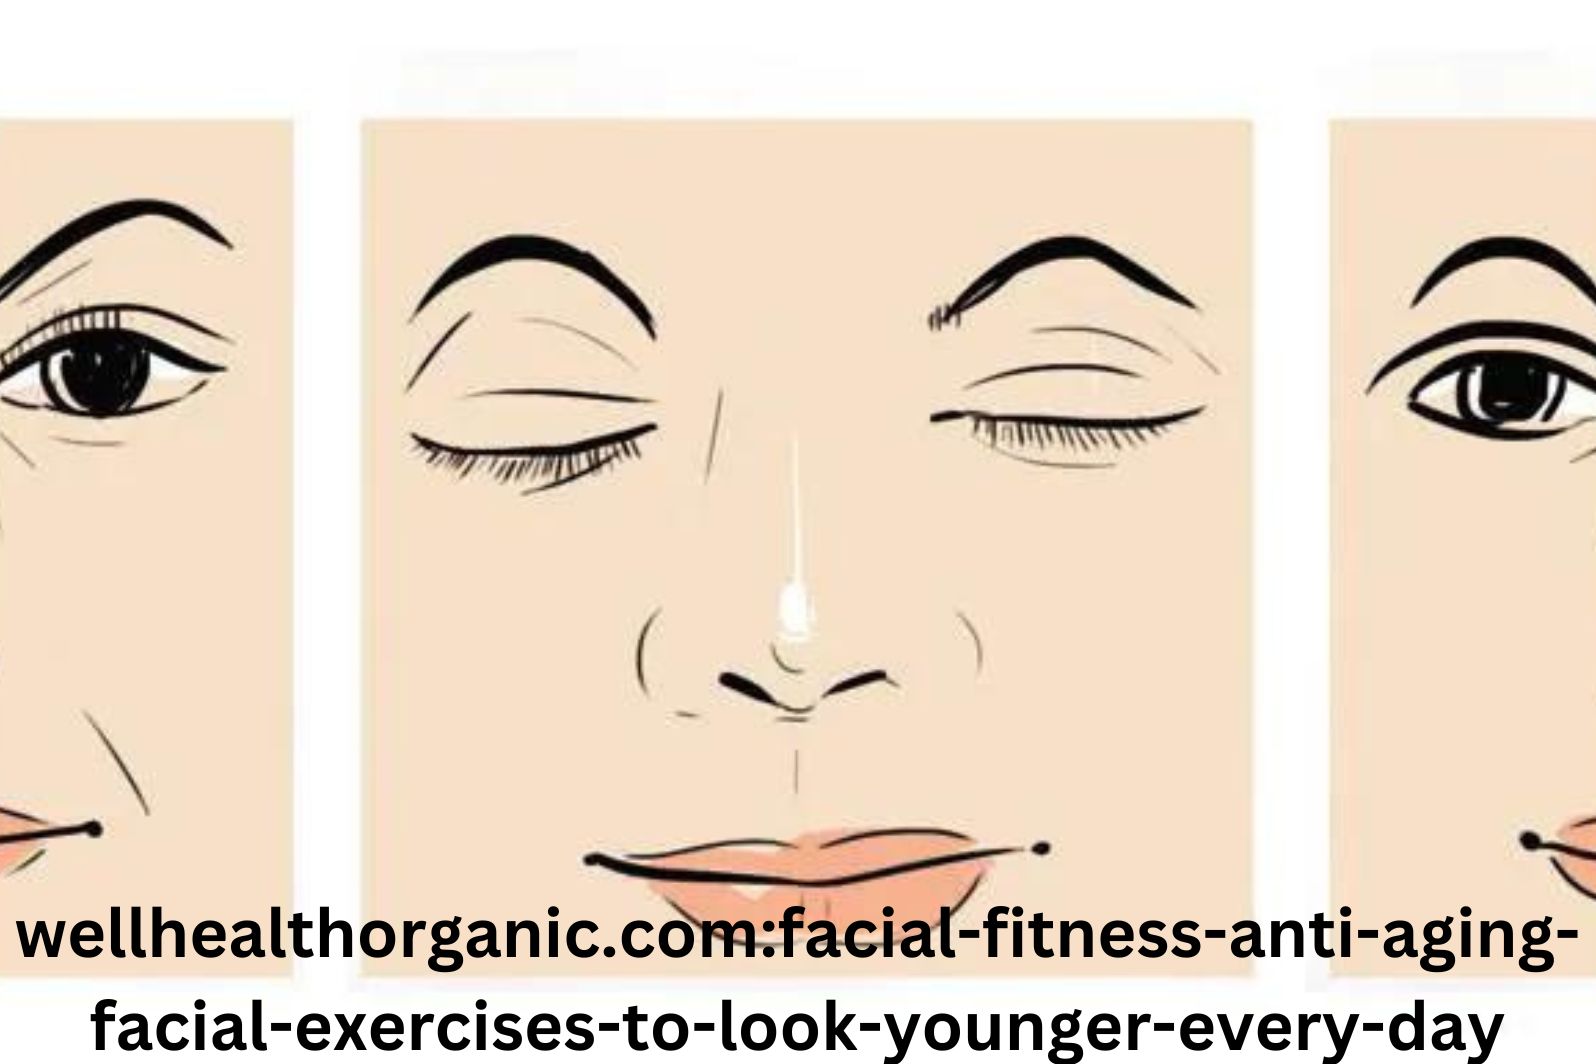 wellhealthorganic.com:facial-fitness-anti-aging-facial-exercises-to-look-younger-every-day